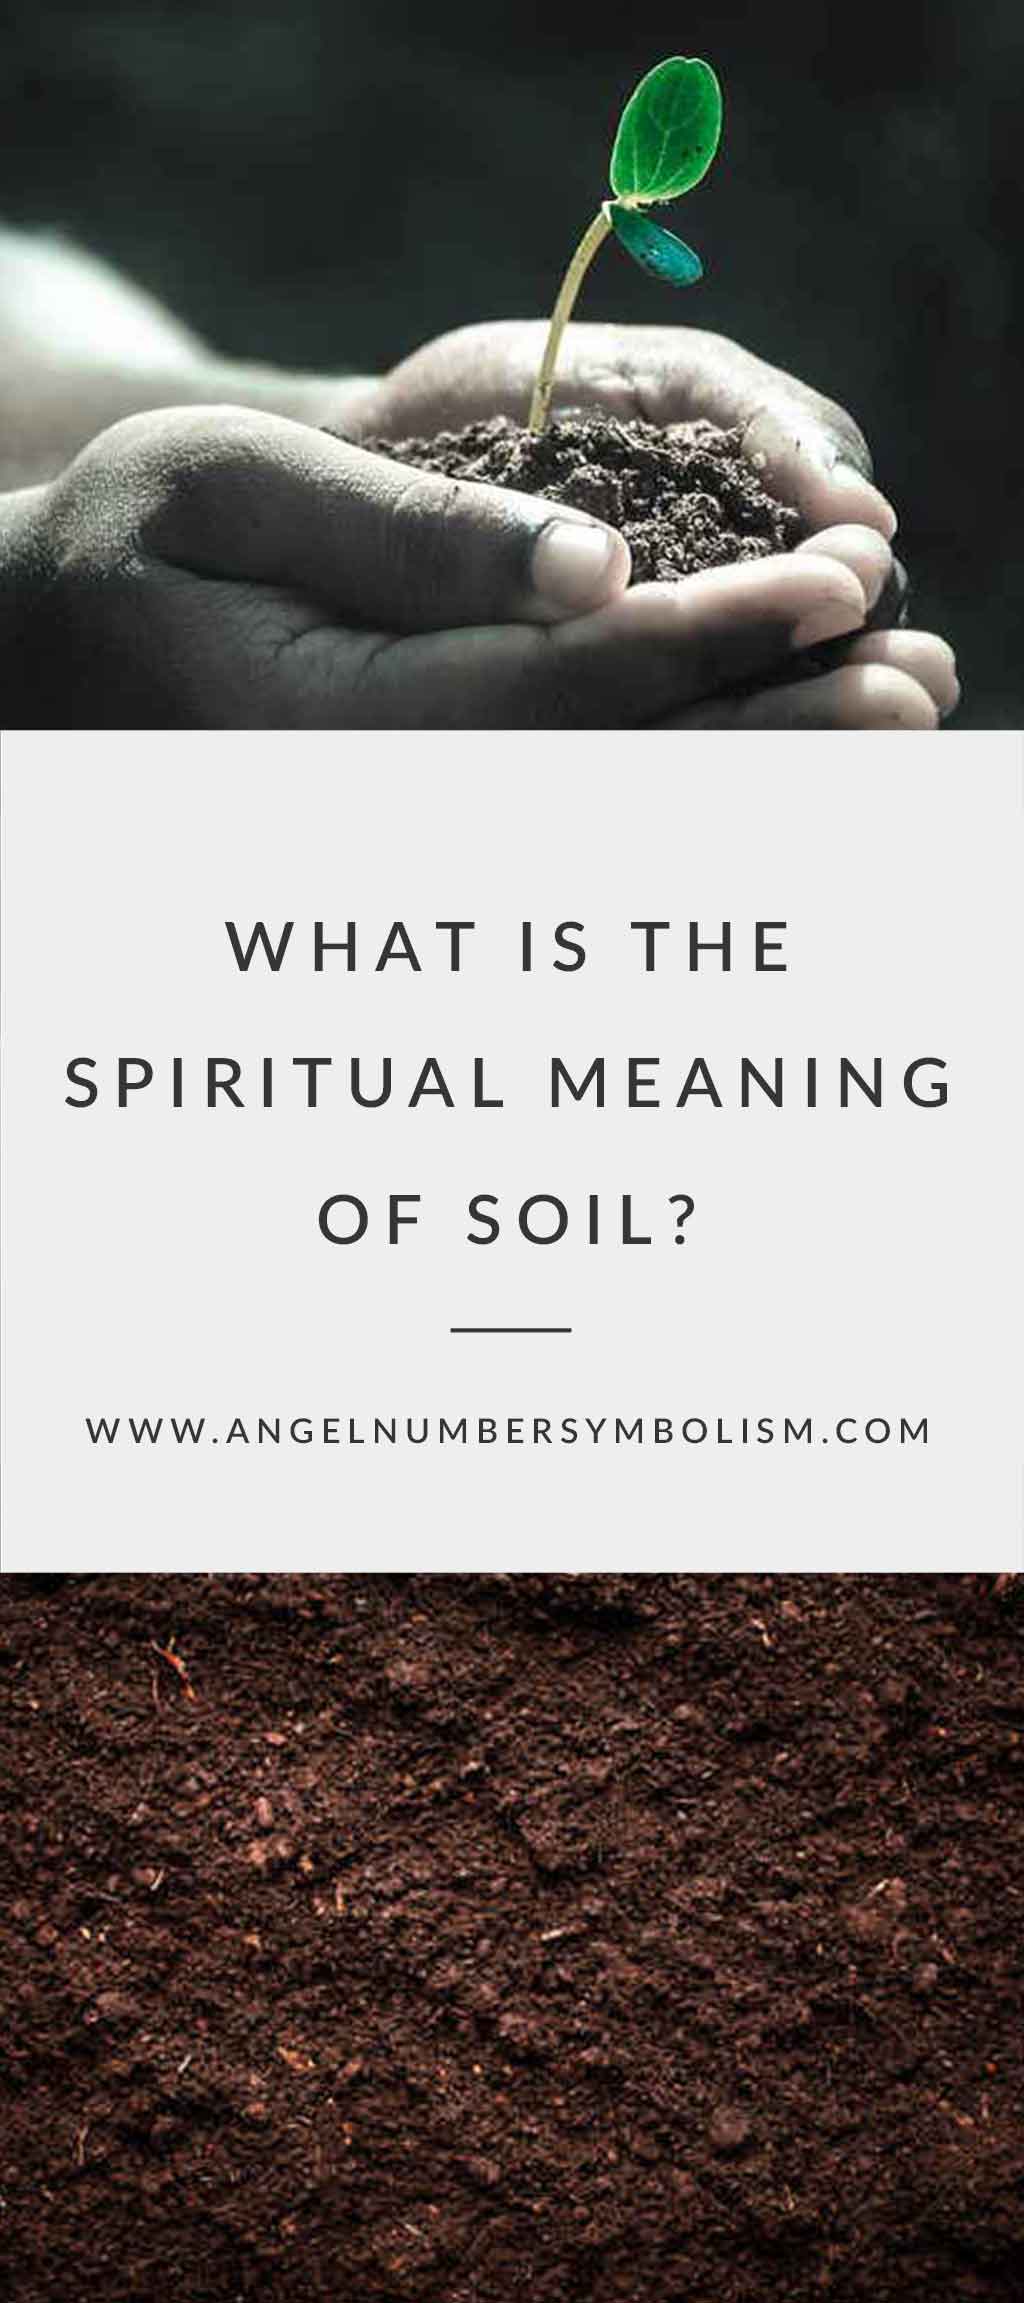 What Is the Spiritual Meaning of Soil